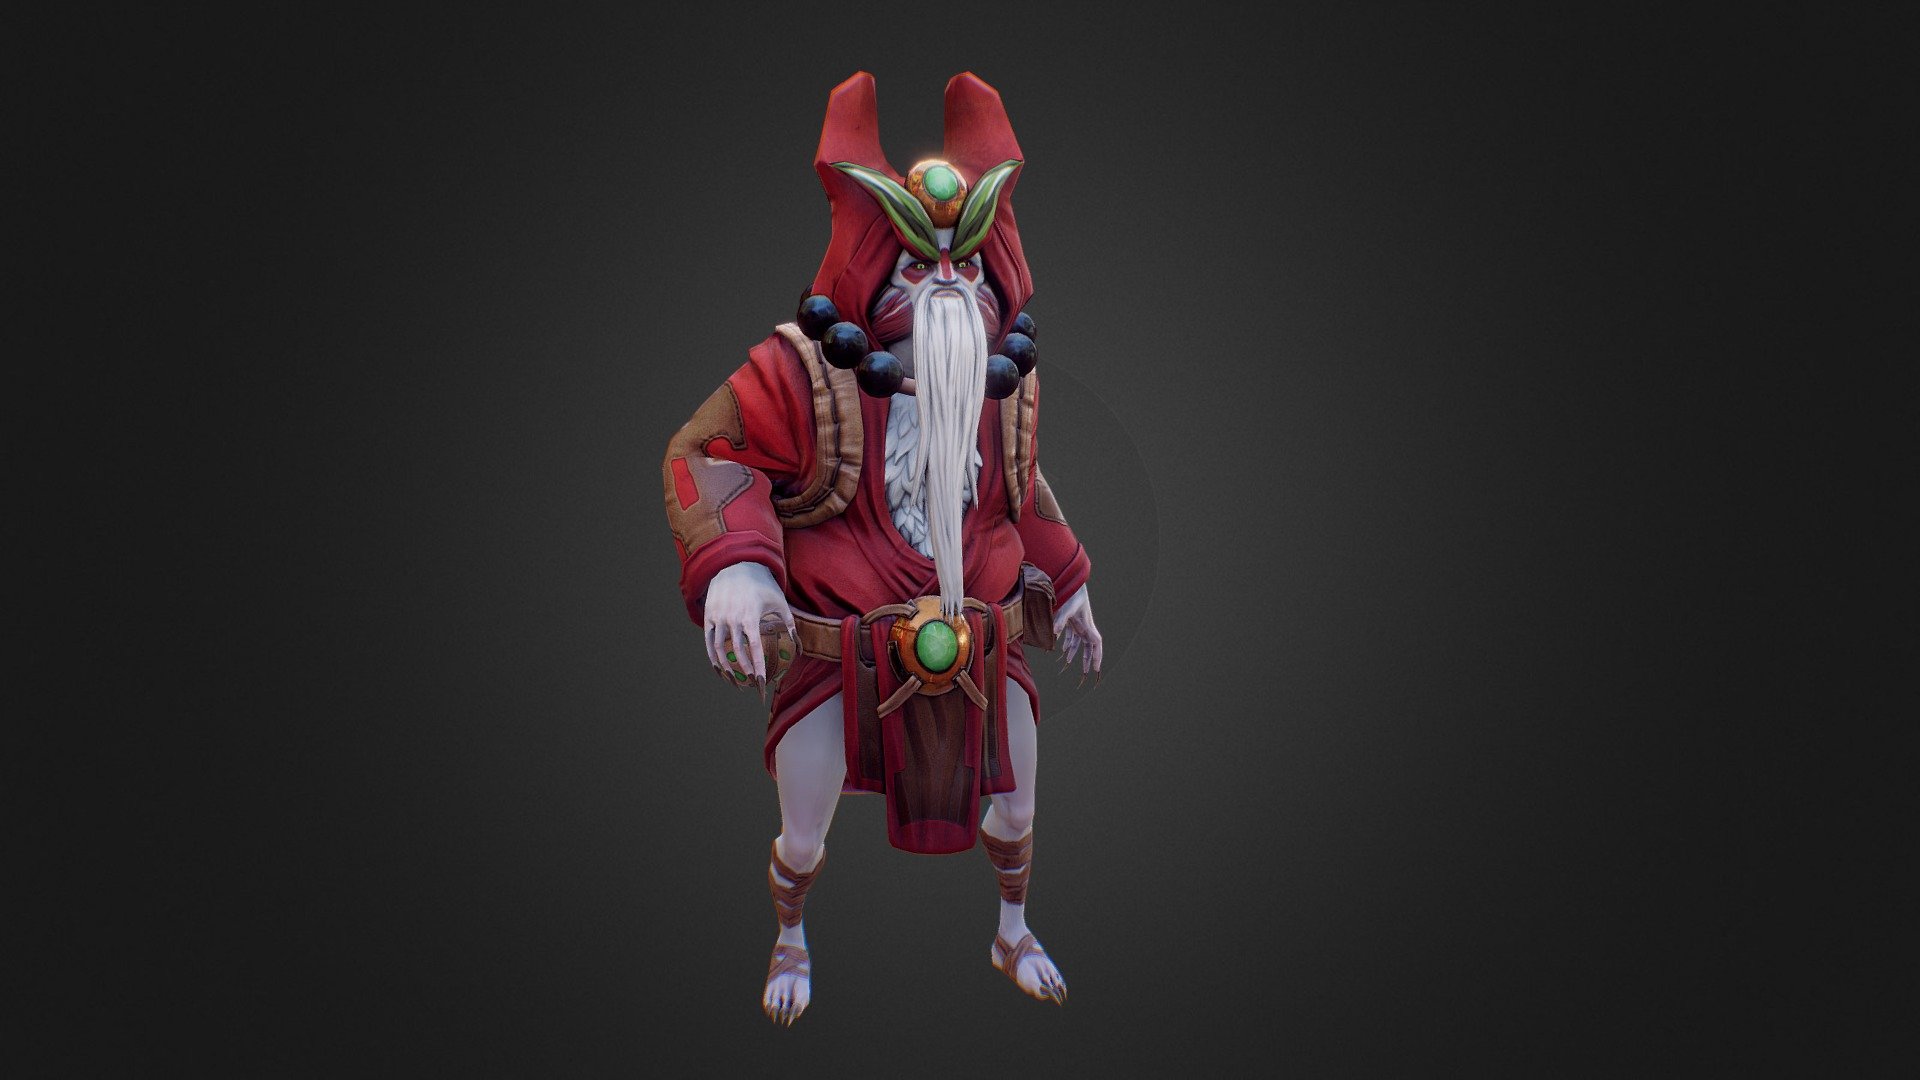 Grejan is a powder master from Kantour's planet
Another character made for Games of Glory - the futuristic action-Moba game - Grejan - 3D model by kiwiii 3d model